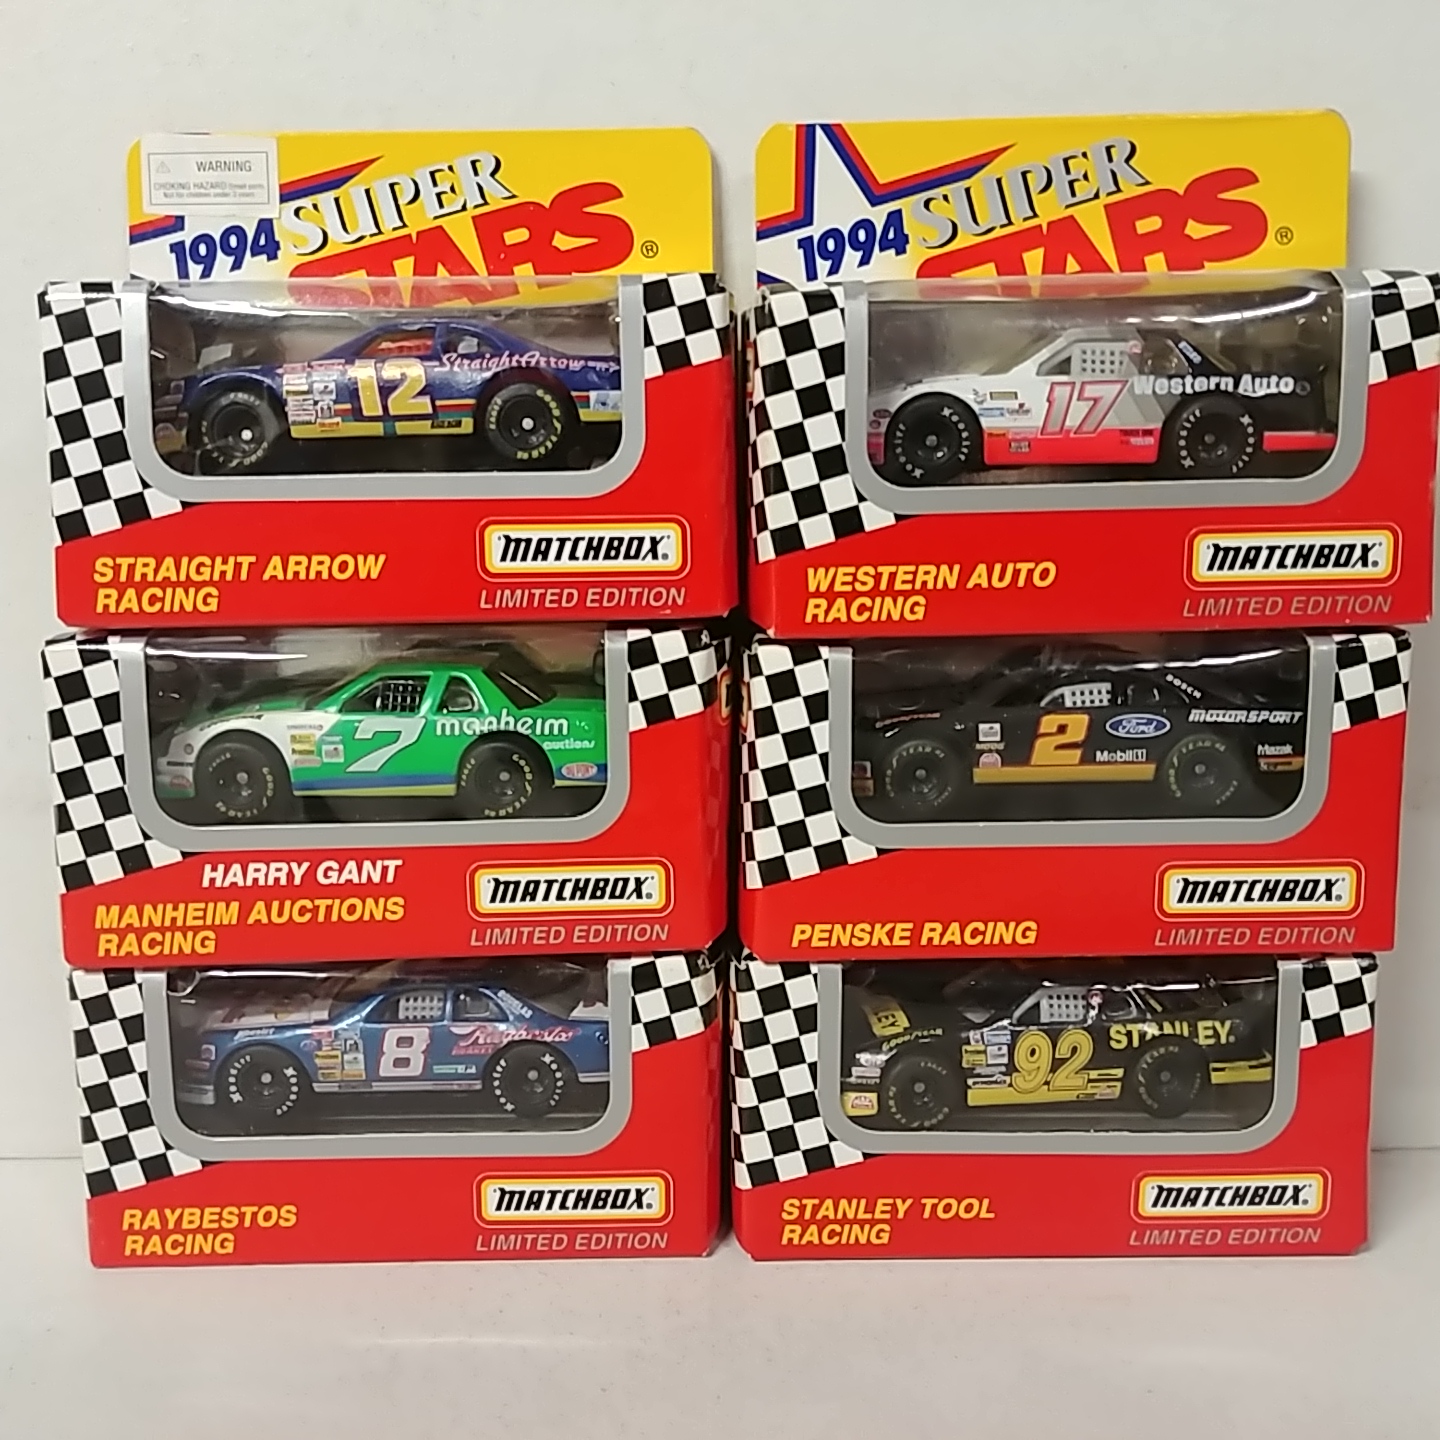 1994 White Rose Collectibles 1/64th Value Pack 02,07,08,12,17,92 cars